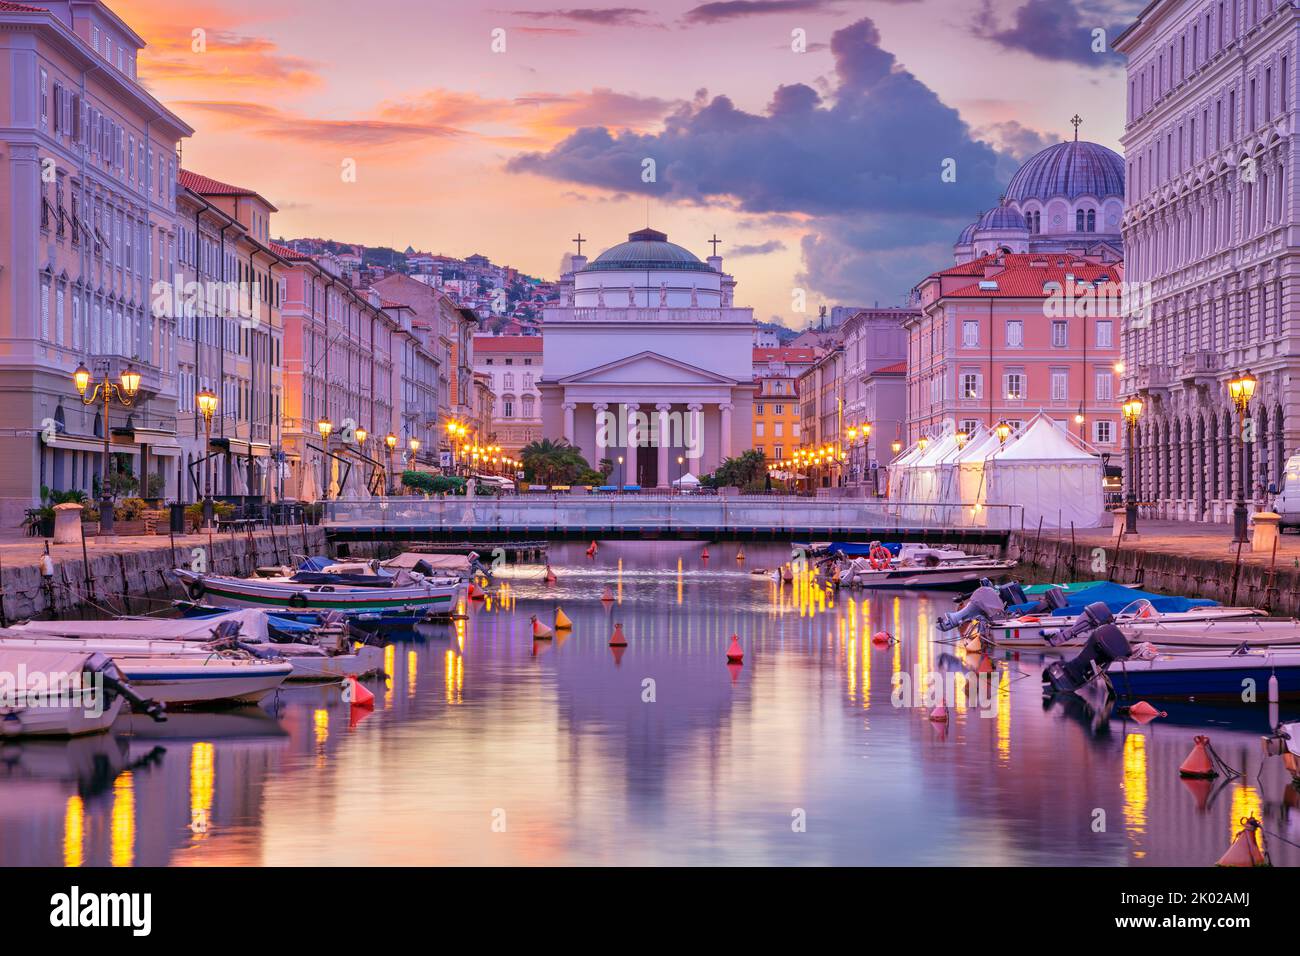 Trieste, Italy. Cityscape image of downtown Trieste, Italy at summer sunrise. Stock Photo